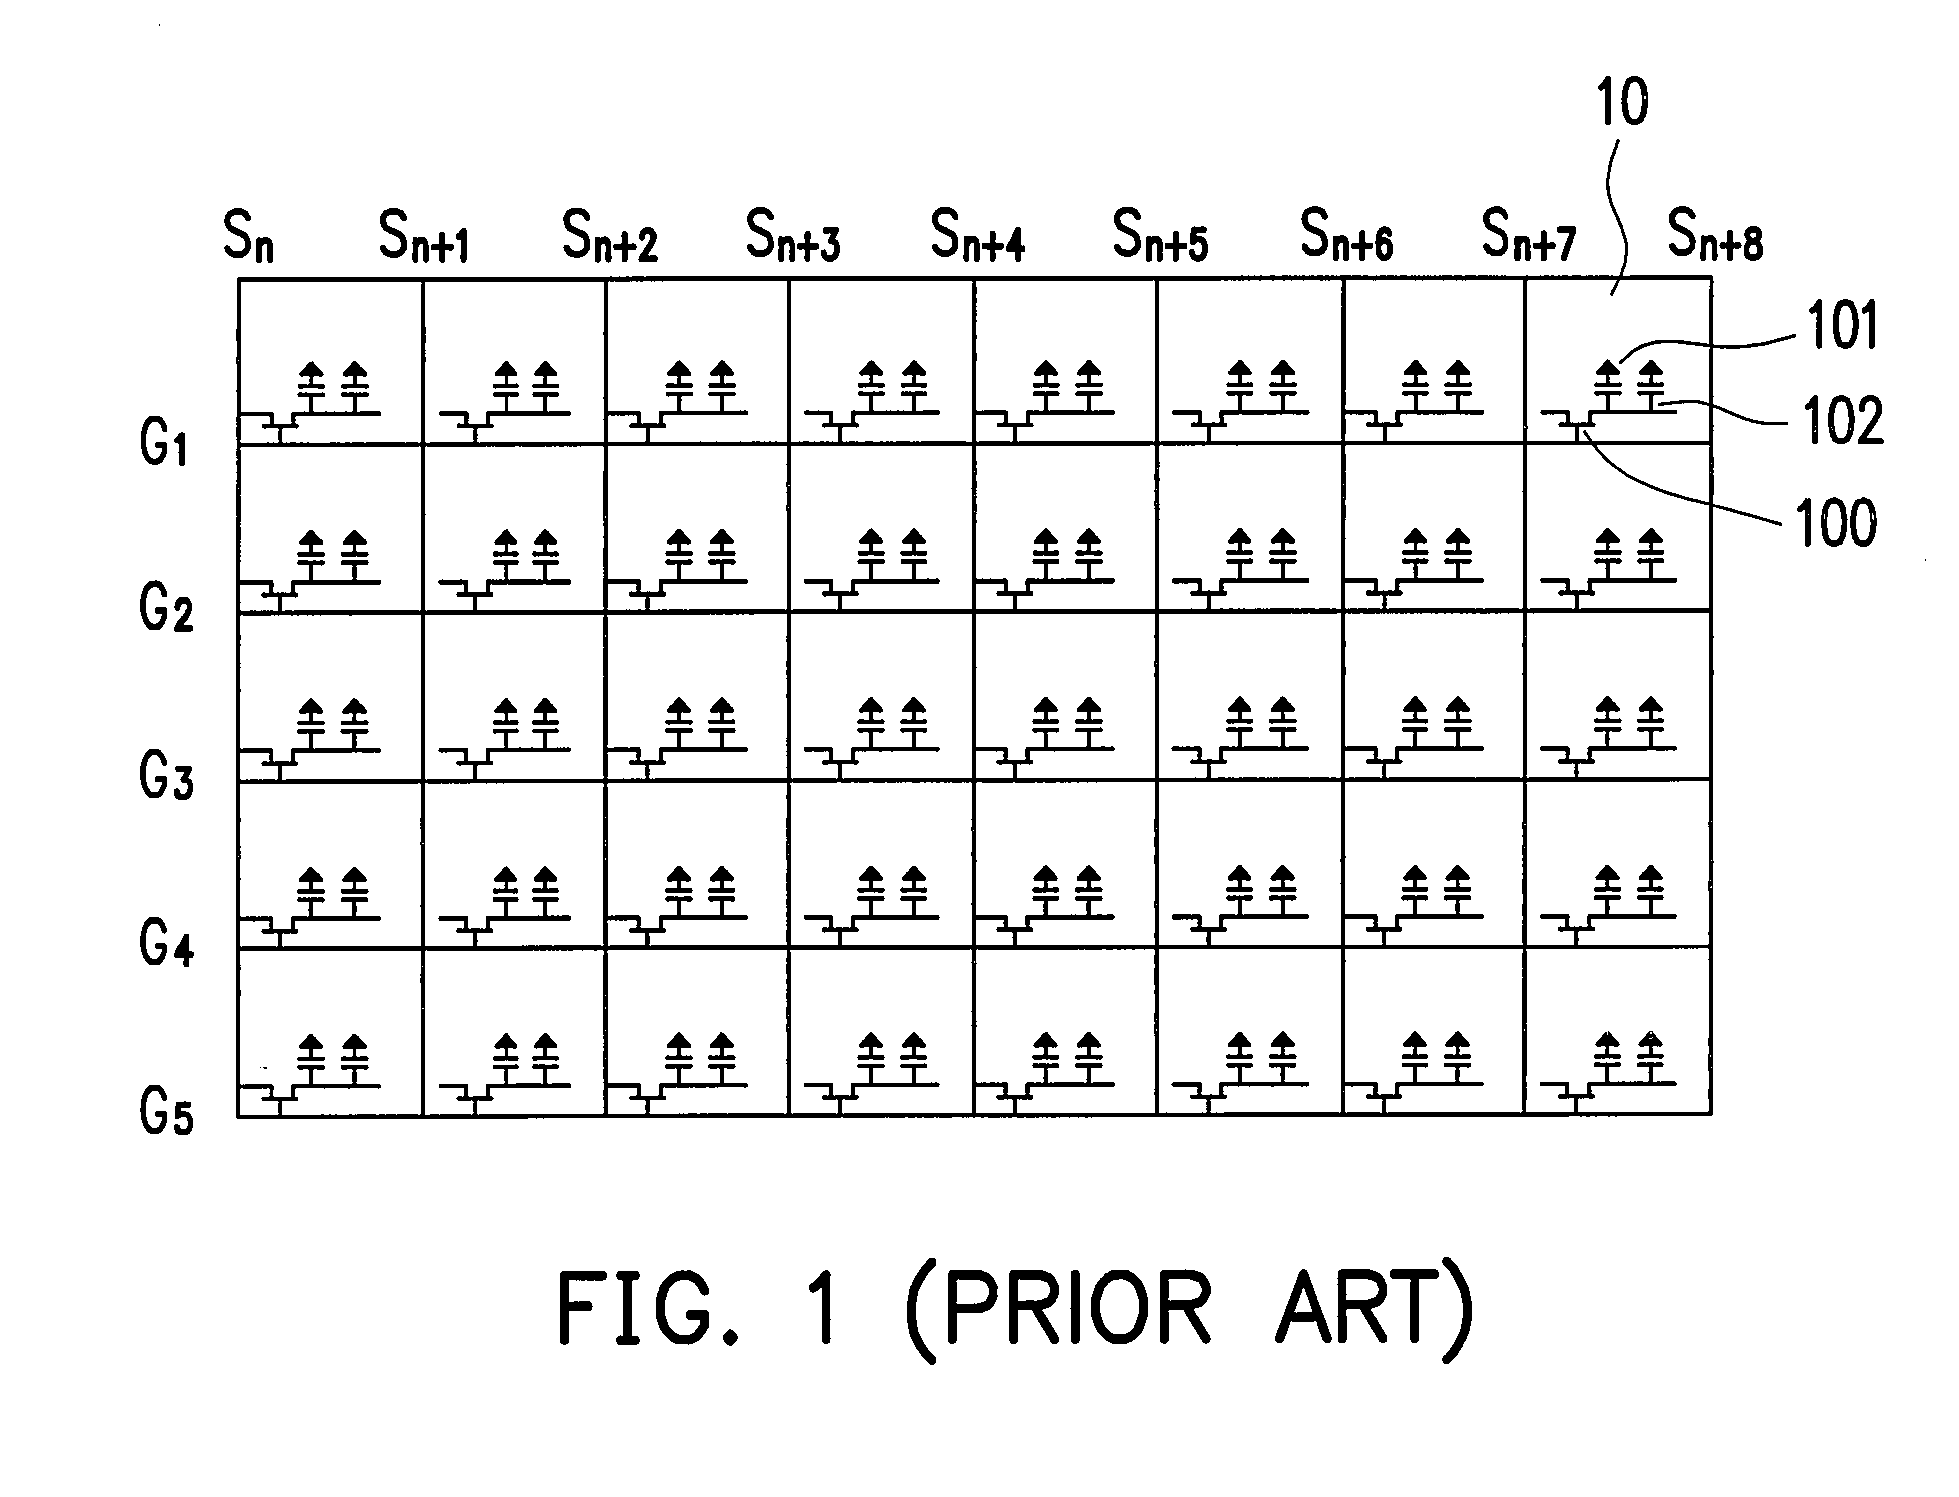 Timing controller for controlling pixel level multiplexing display panel